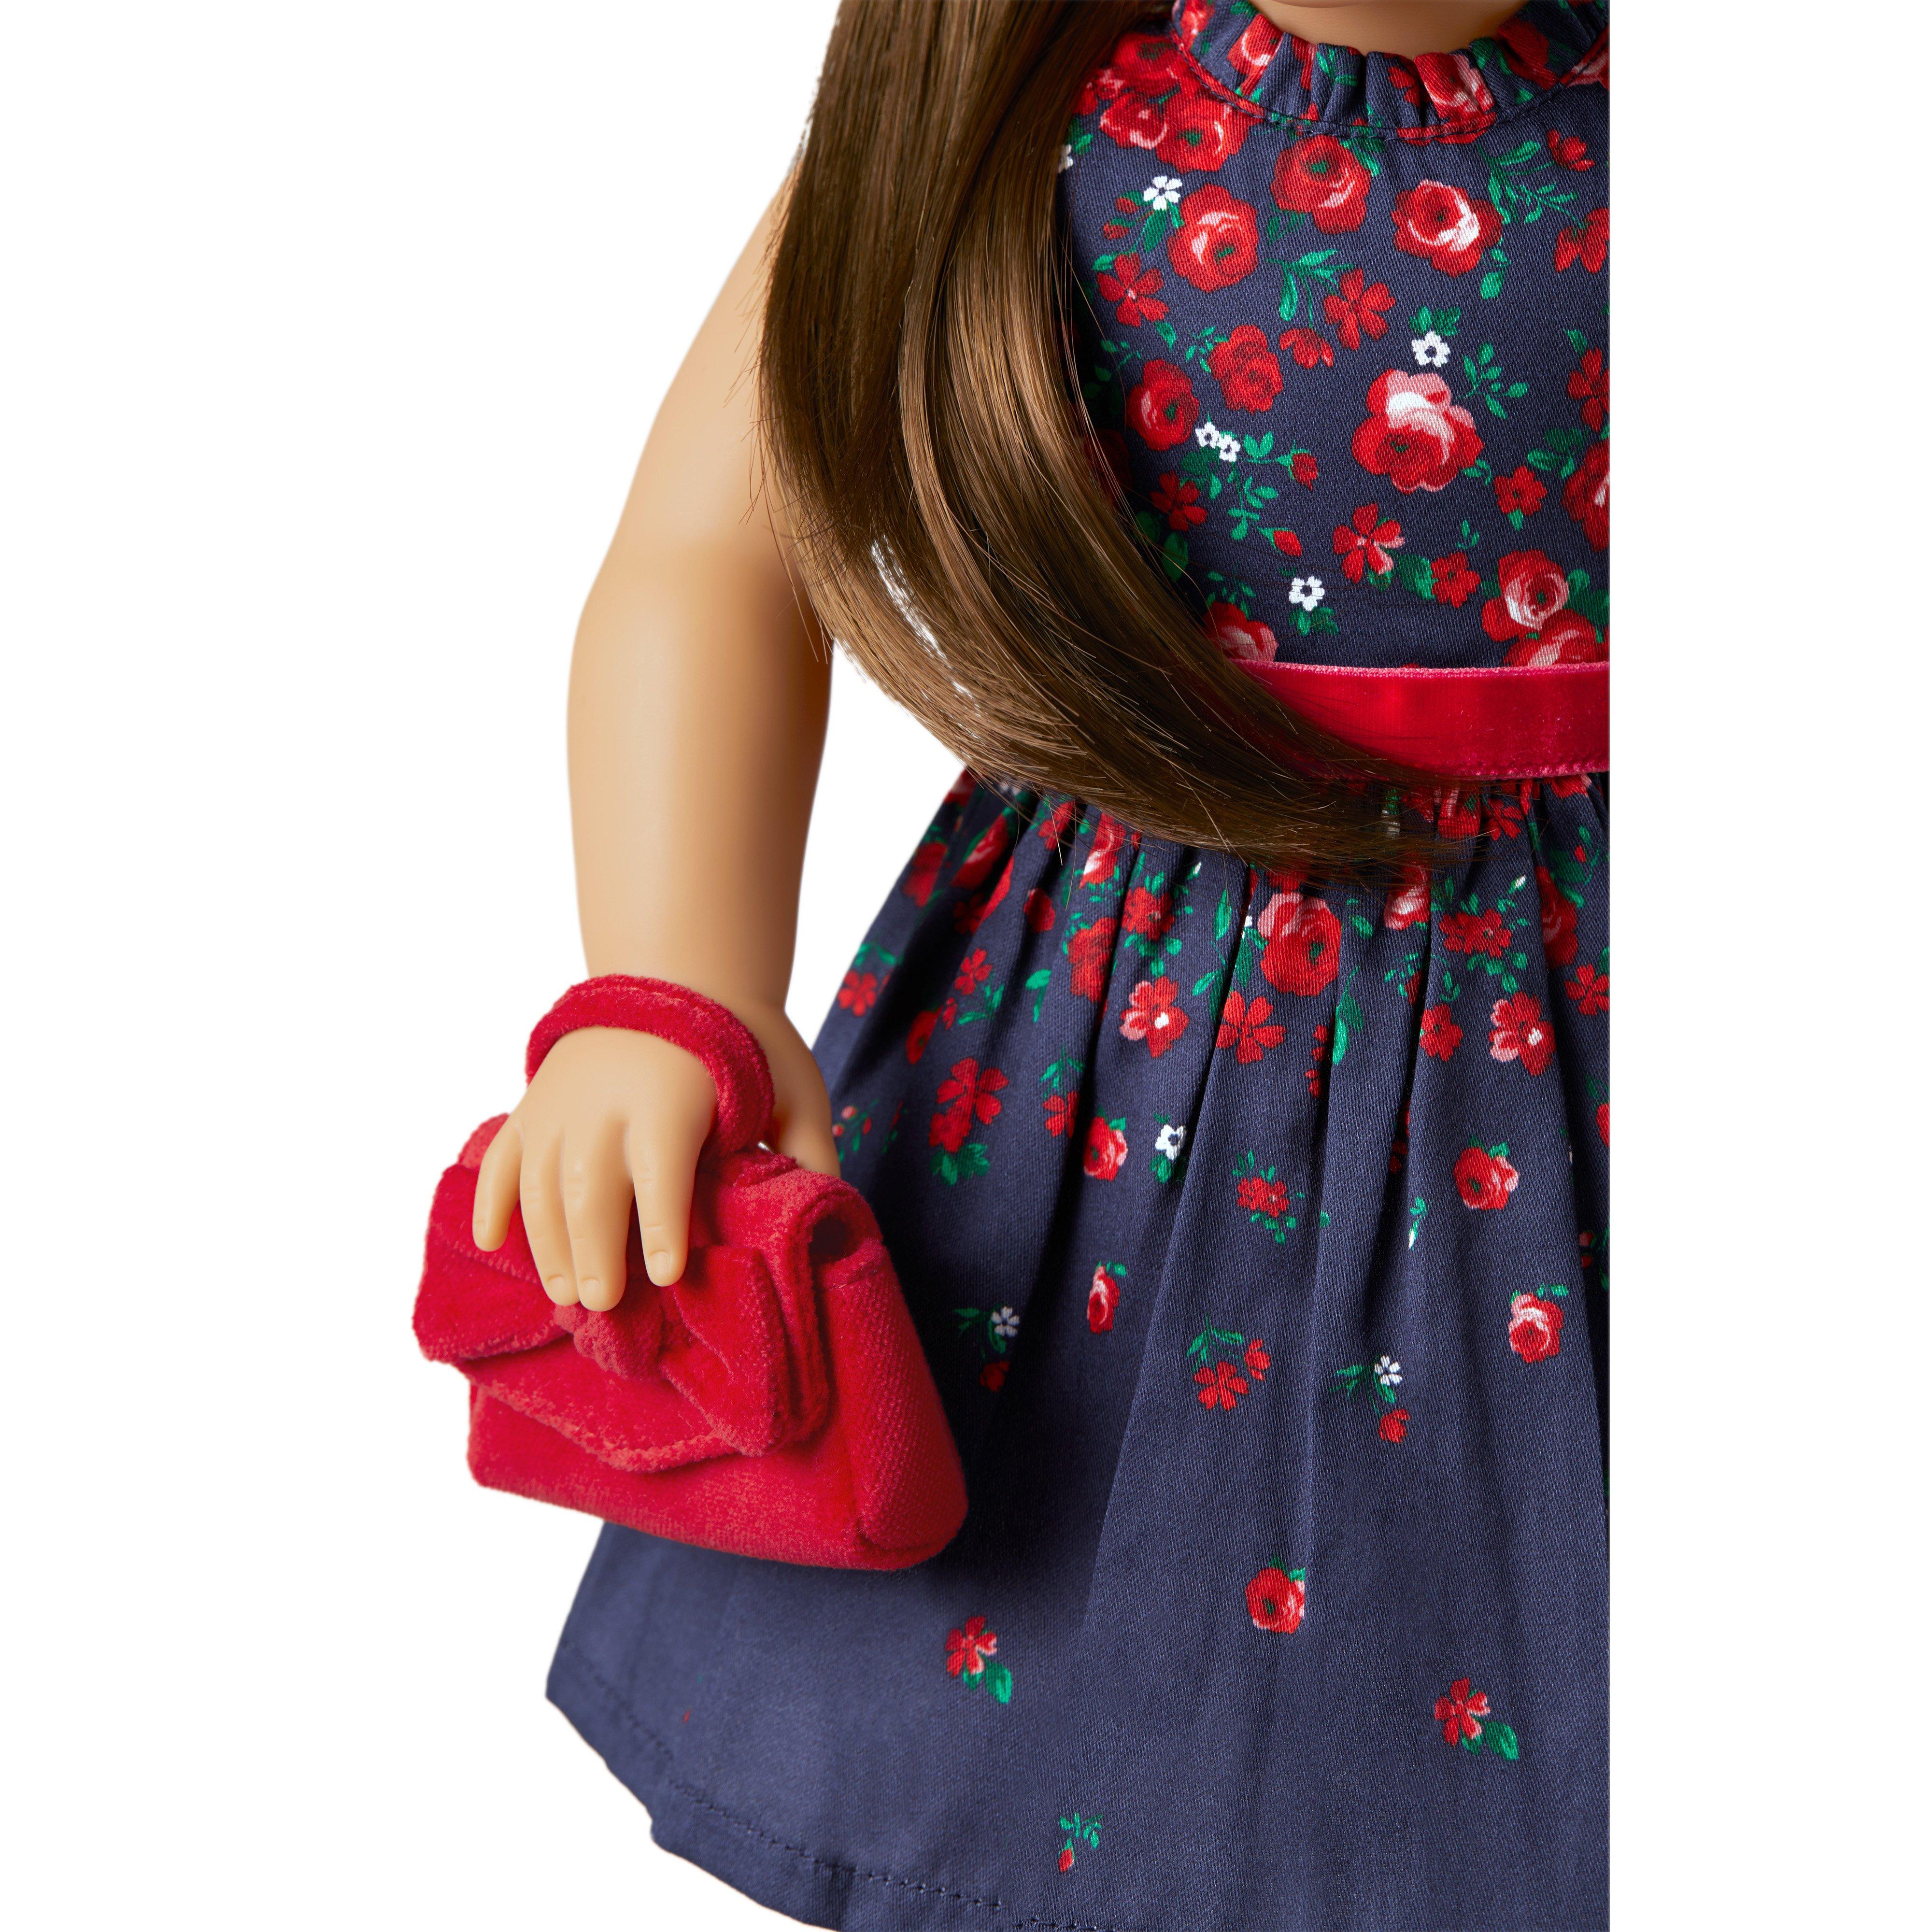 American Girl® x Janie And Jack Wrapped in Roses Dress For Dolls image number 5